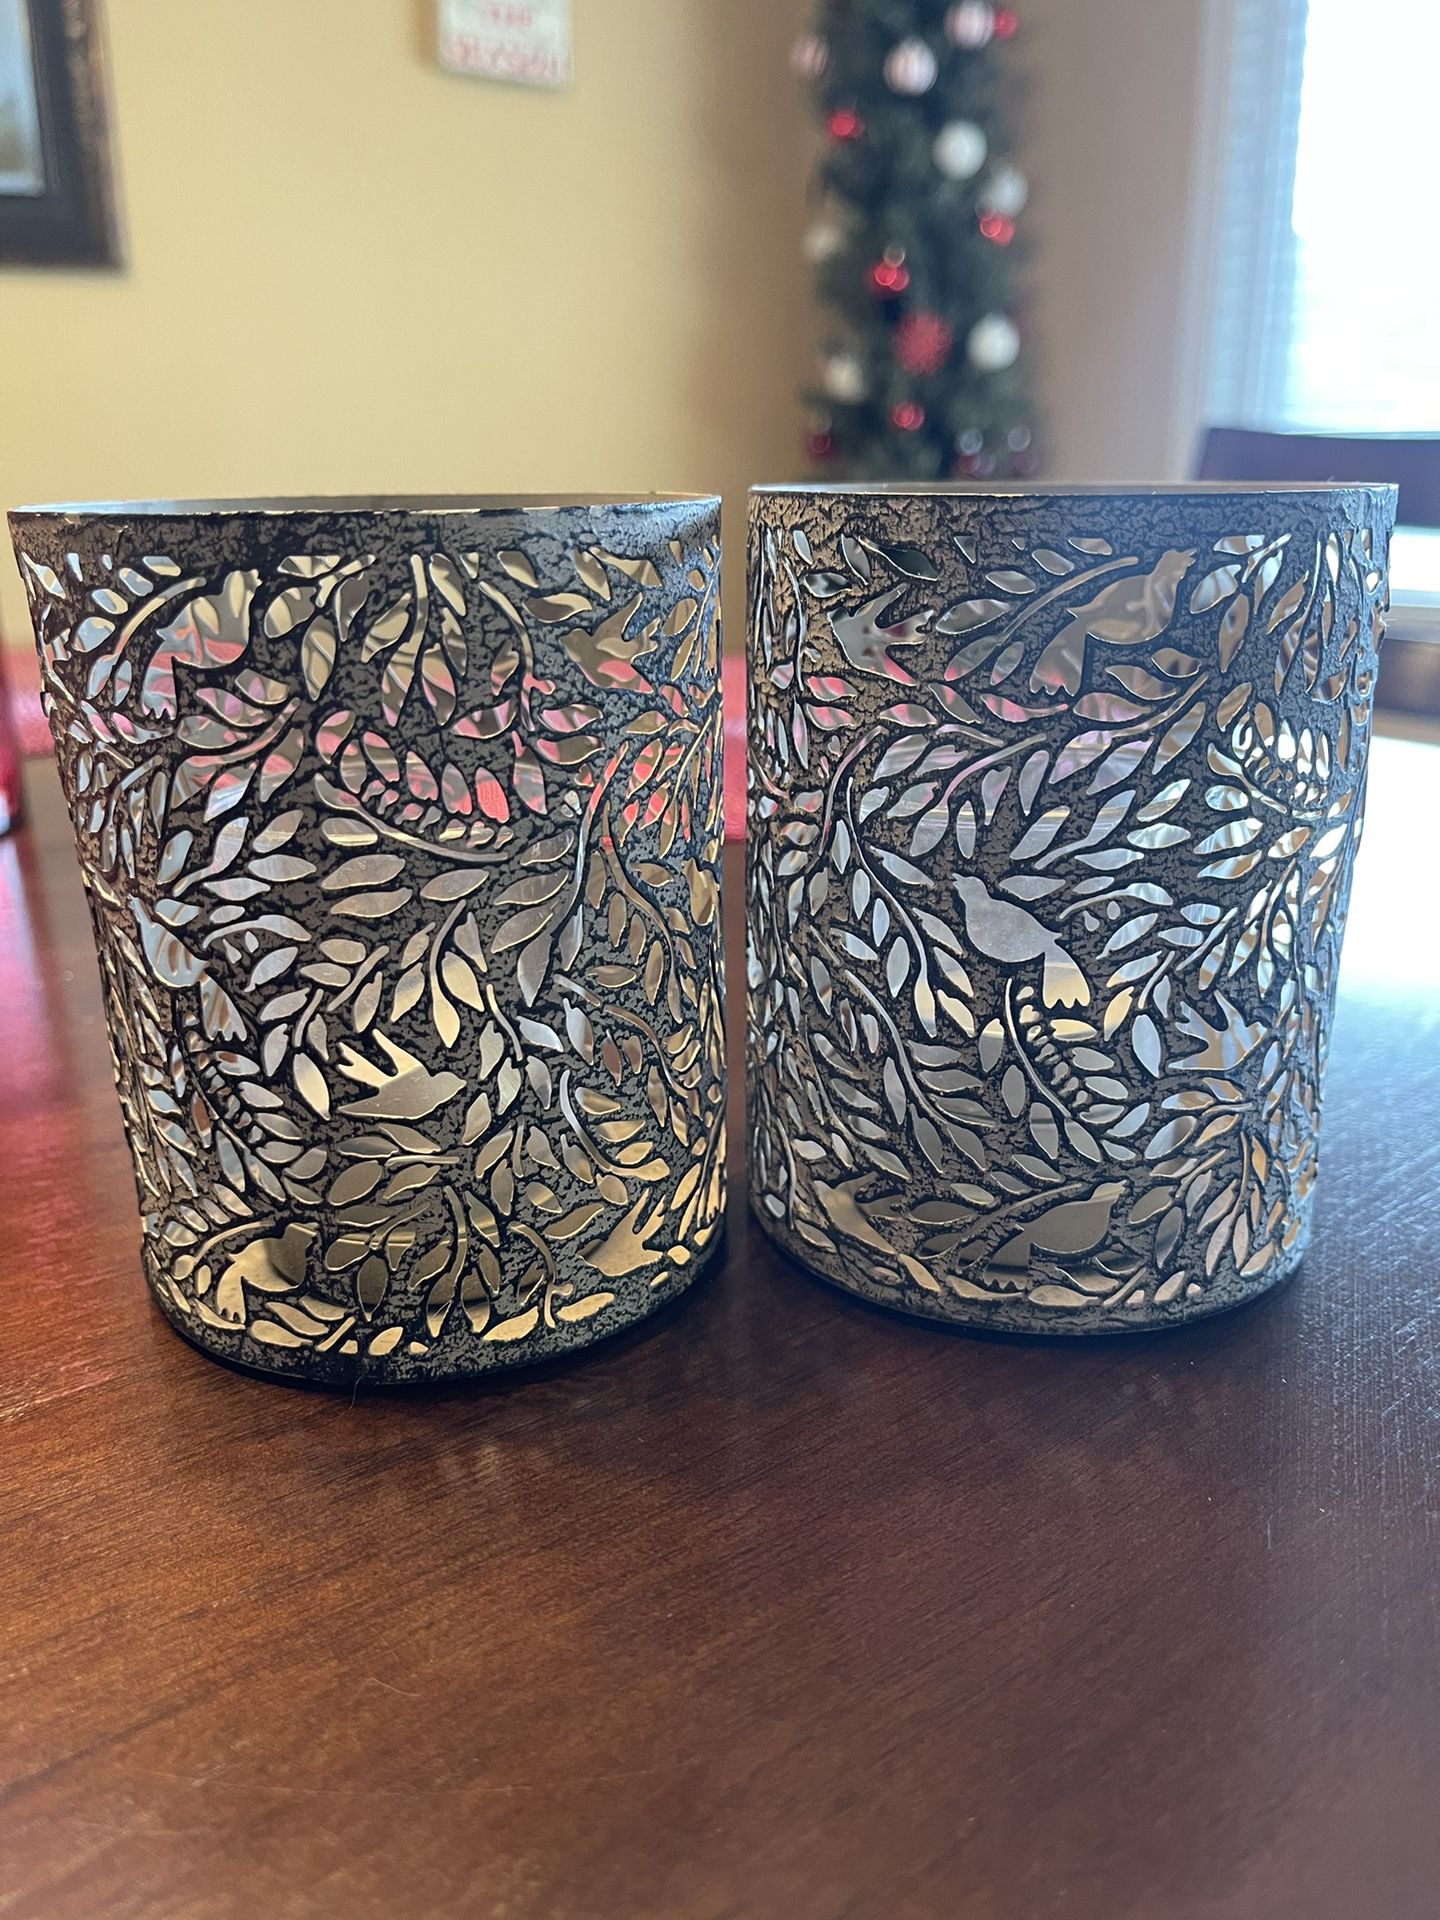 Candle Holders / Tealight Holders 